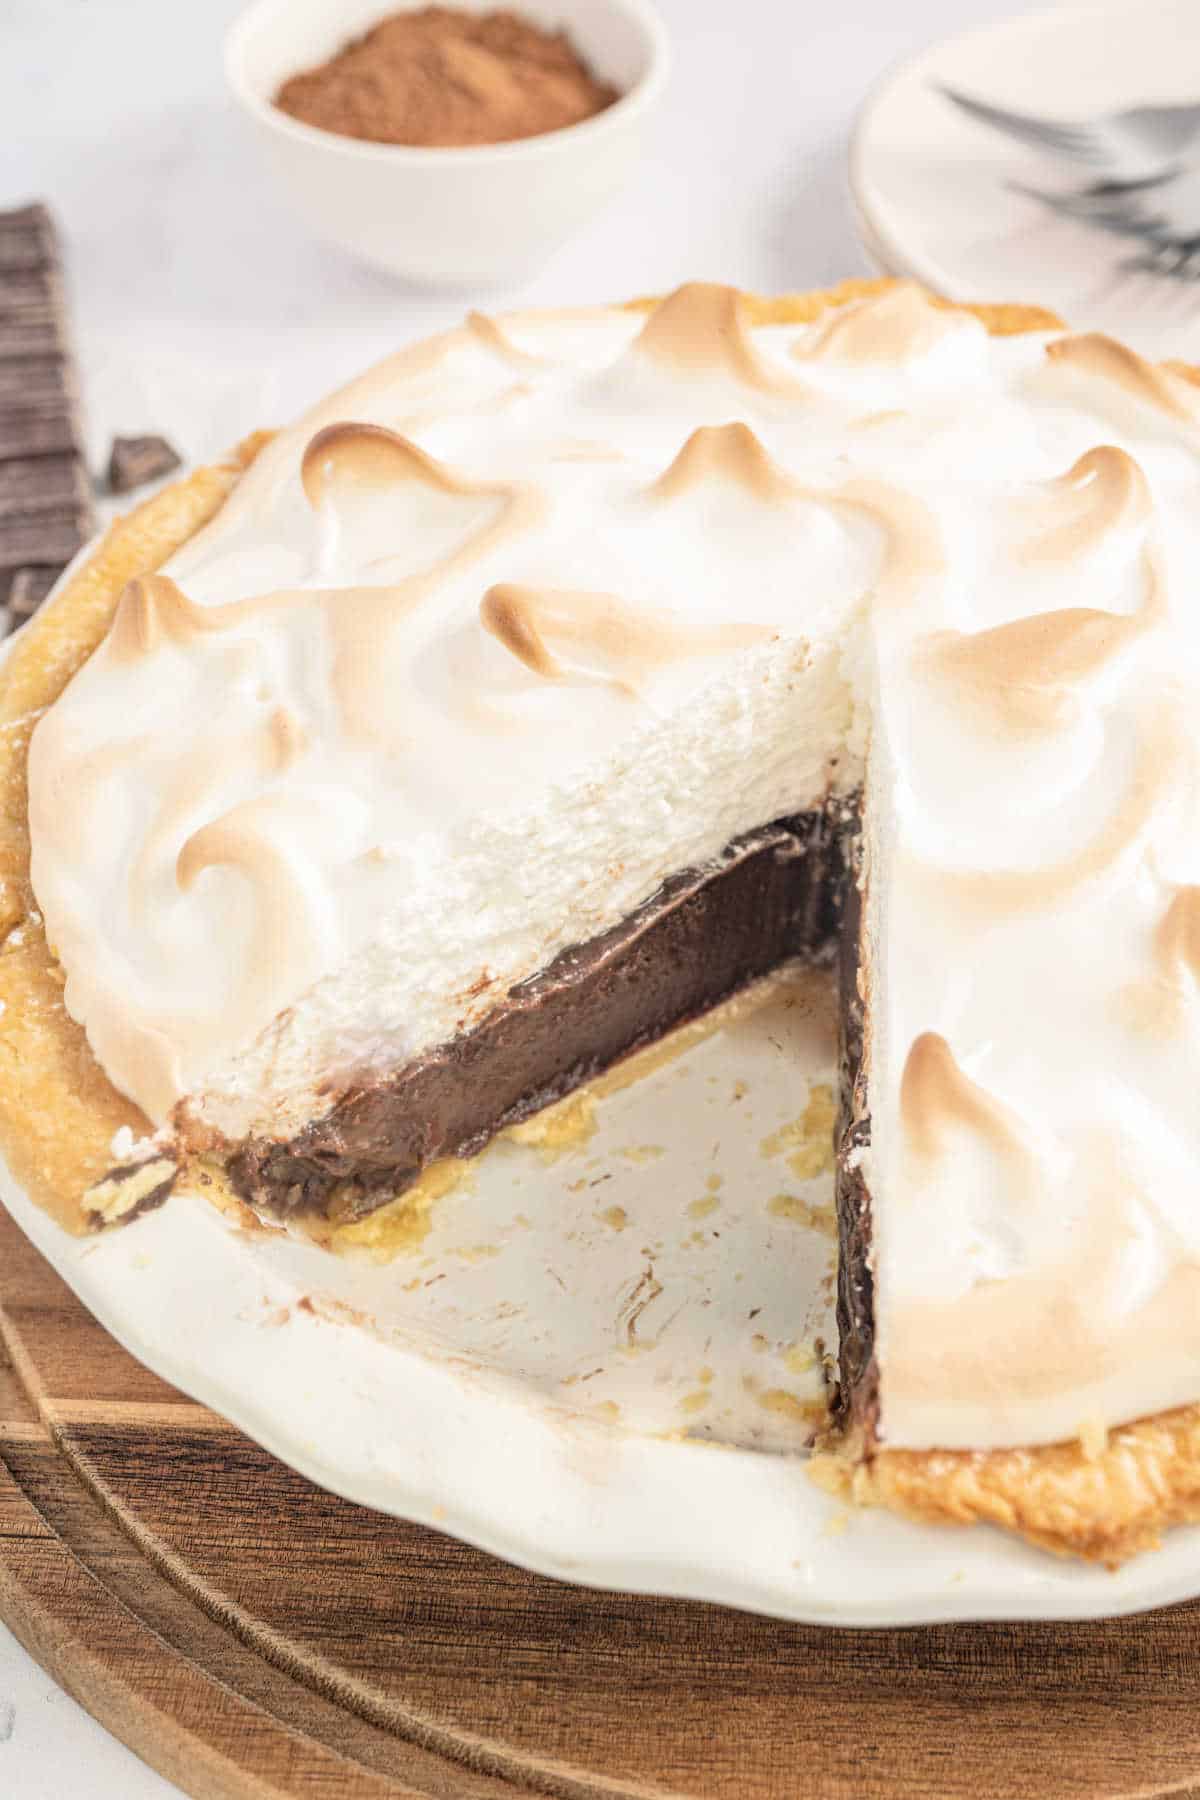 Chocolate pie with meringue topping and a slice removed.